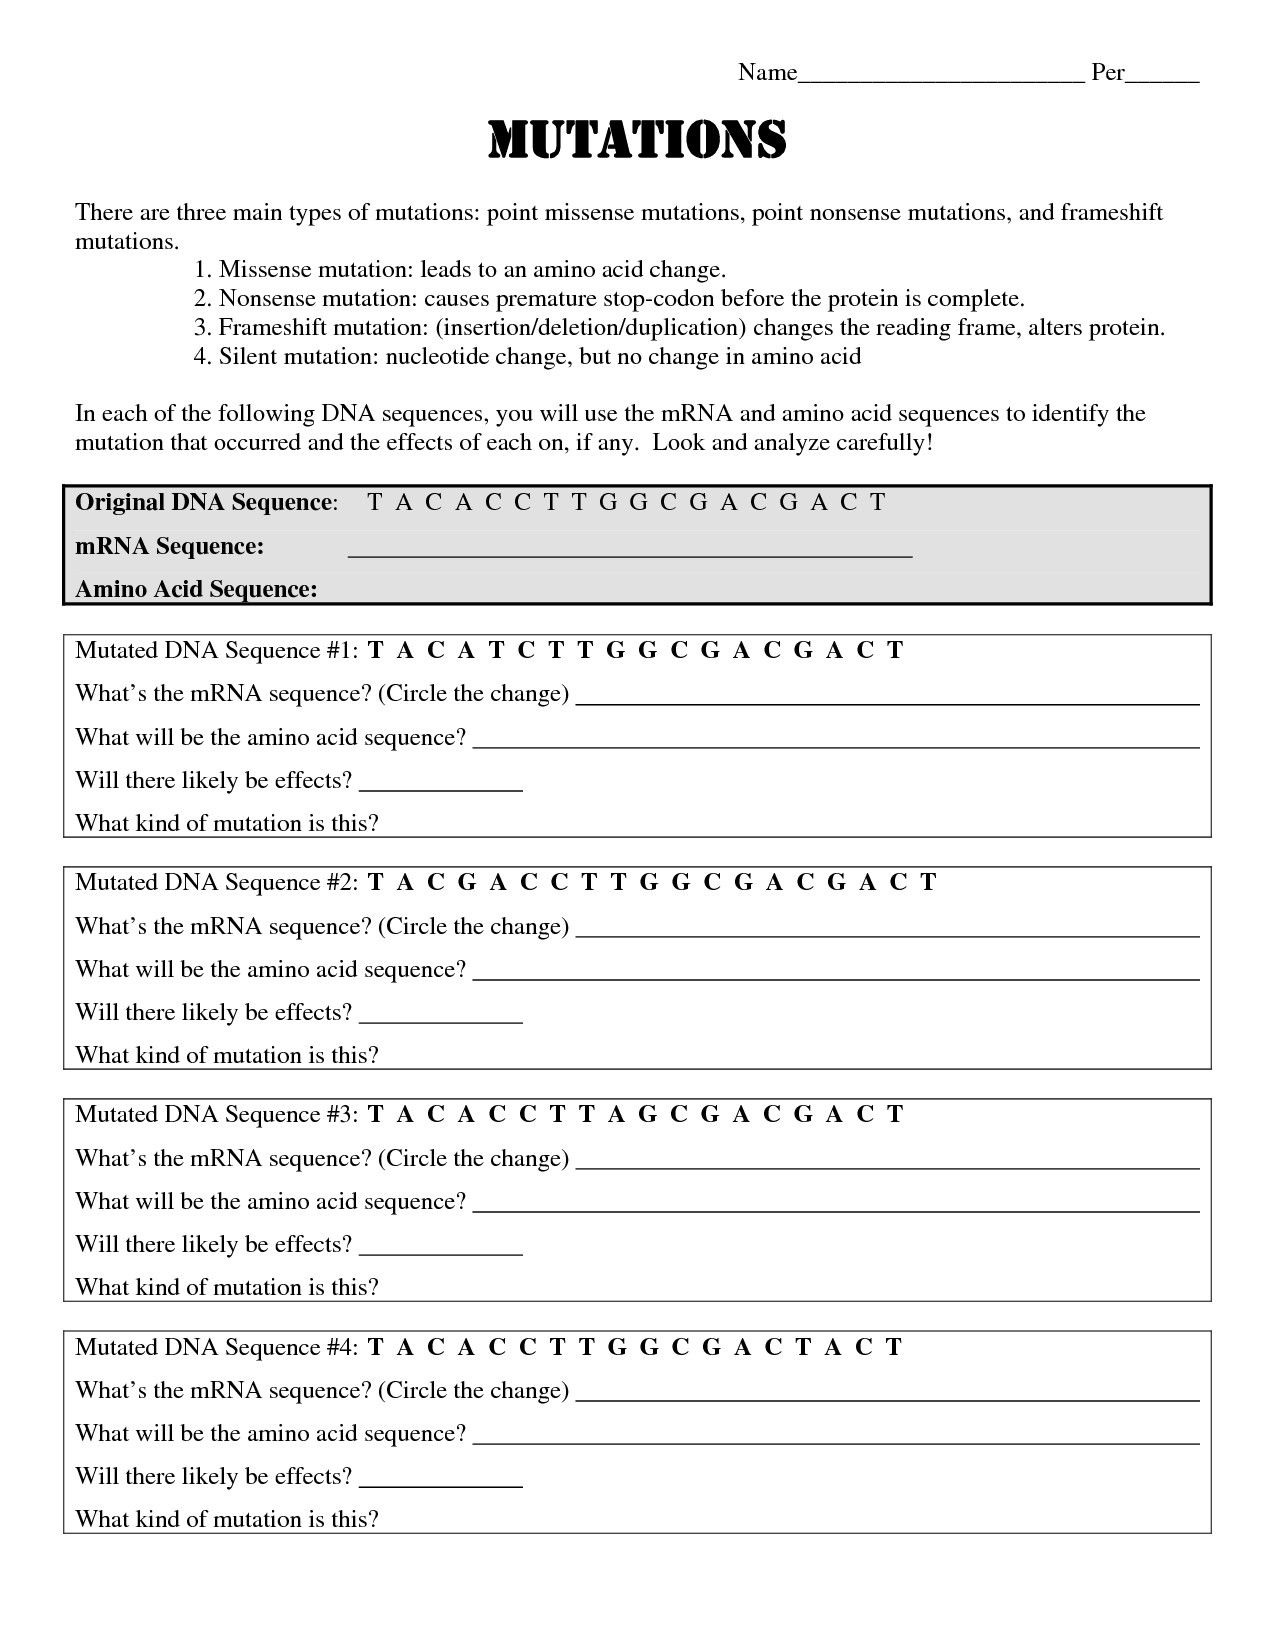 sickle-cell-anemia-worksheet-answers-db-excel